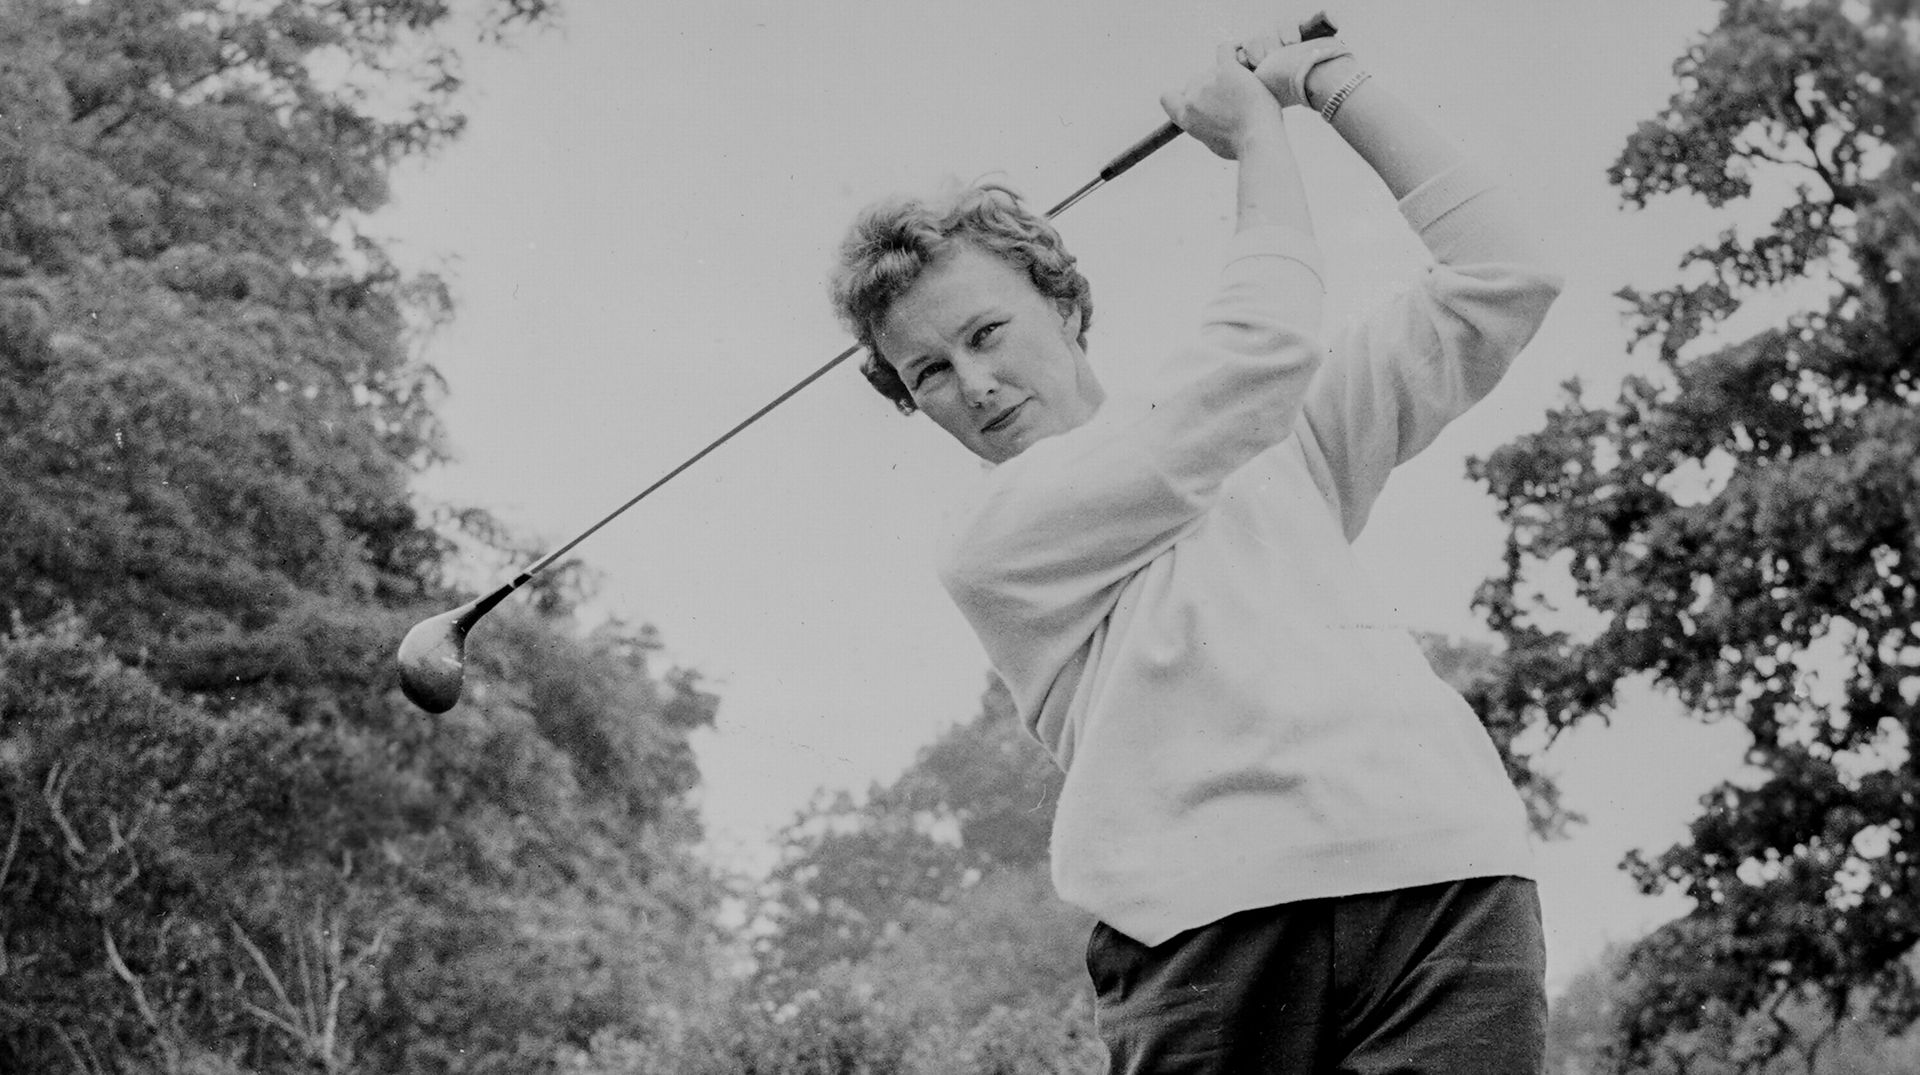 <p>                     Shirley Spork, one of the founding members of the LPGA, once said Wright “had the best swing ever”, an action that everyone wanted. Ben Hogan said exactly the same. She was taught to use her legs in the golf swing to drive and get the force effort through the ball – and it was mightily effective. With her strength and power, Wright would devour the par 5s. It wasn’t just her power that was so impressive, but her precision with long irons, which she could also send way up high.                   </p>